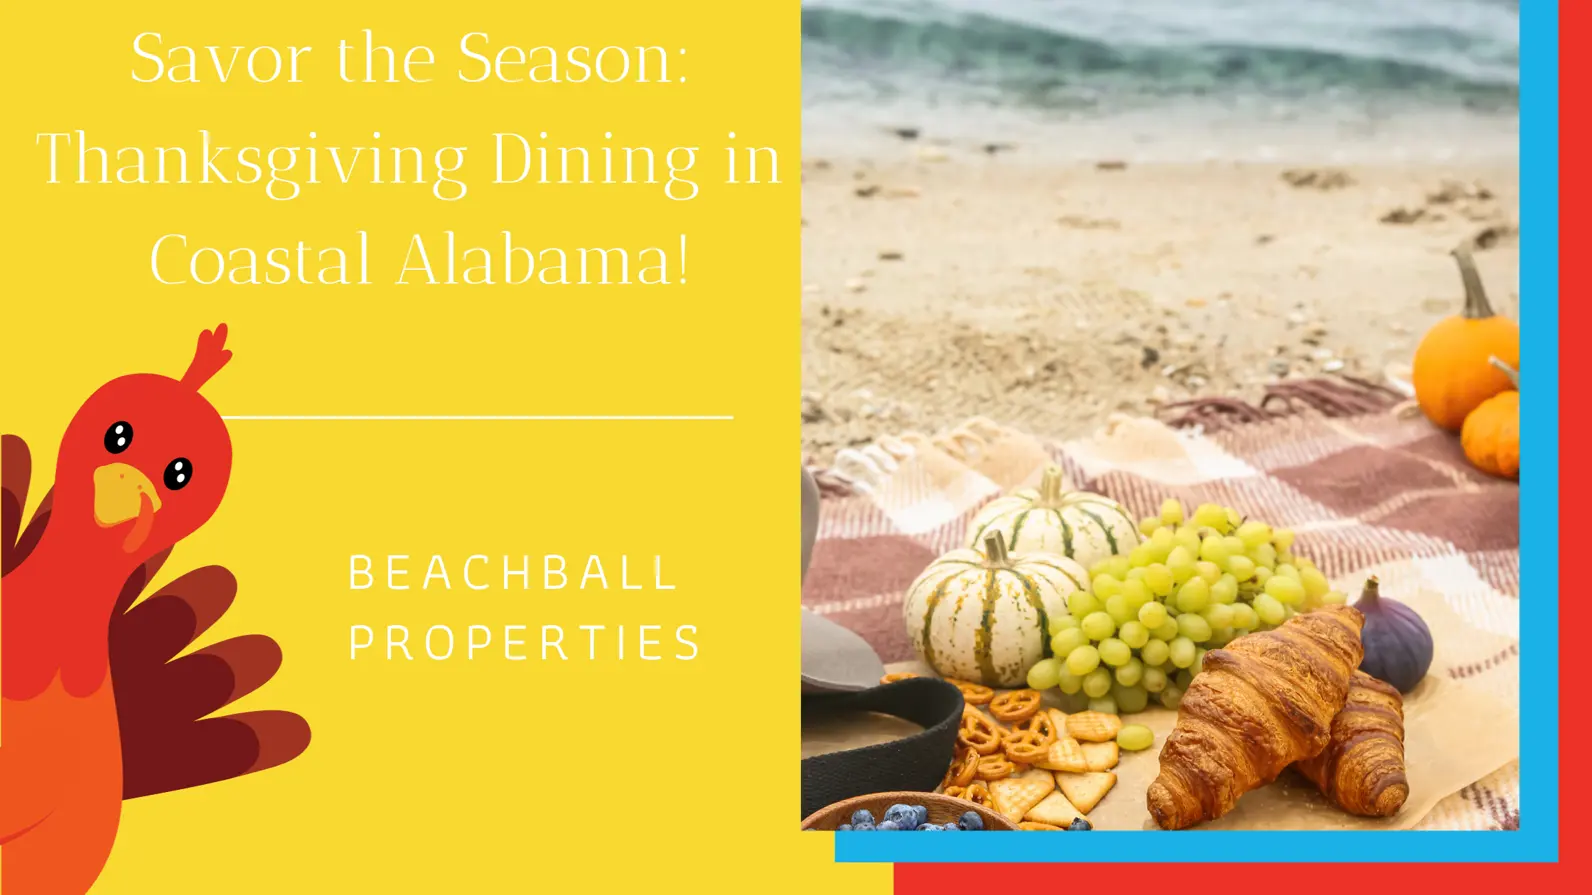 SAVOR THE SEASON: THANKSGIVING DINING IN OUR SCENIC LOCALE!